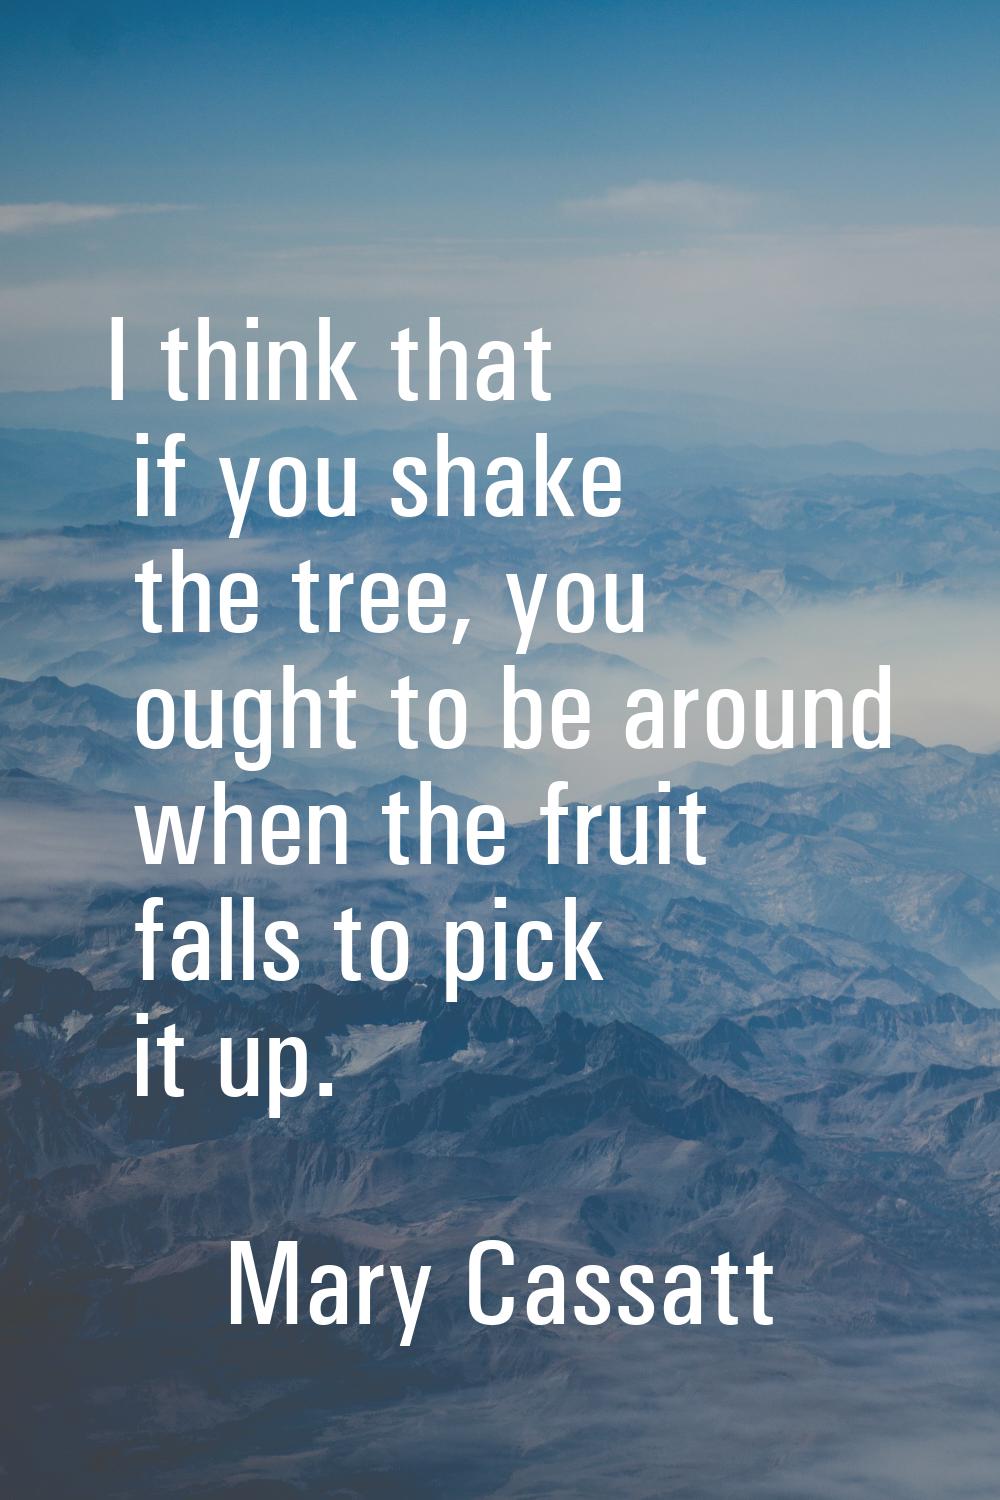 I think that if you shake the tree, you ought to be around when the fruit falls to pick it up.